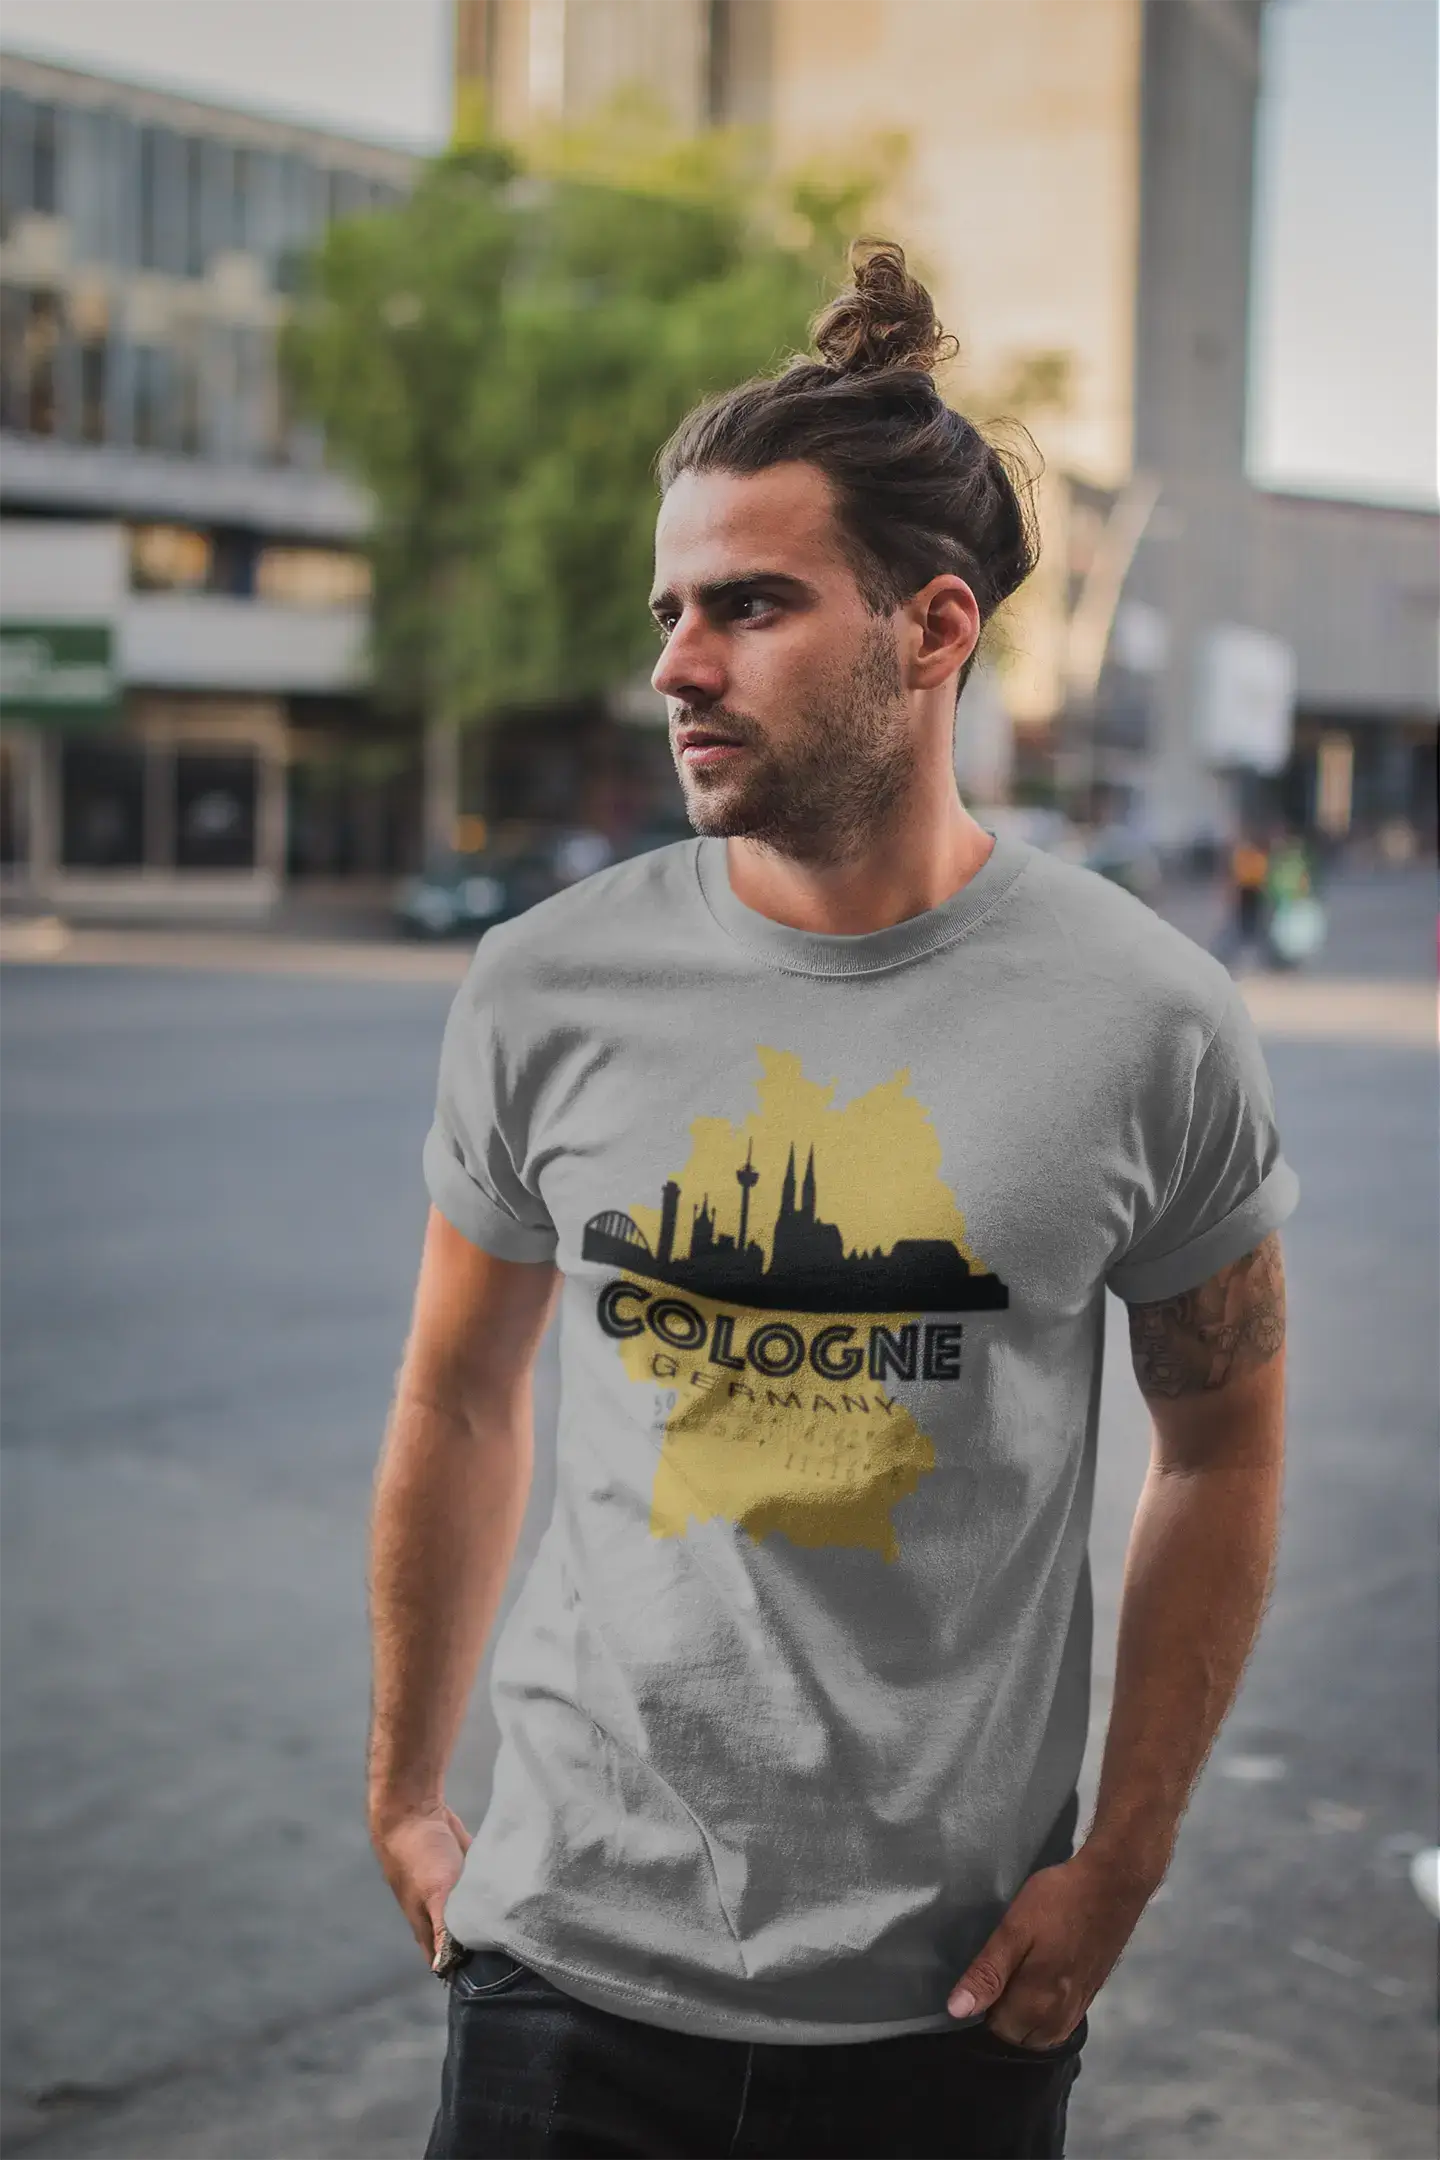 Men's Graphic T-Shirt Cologne Germany Idea Gift